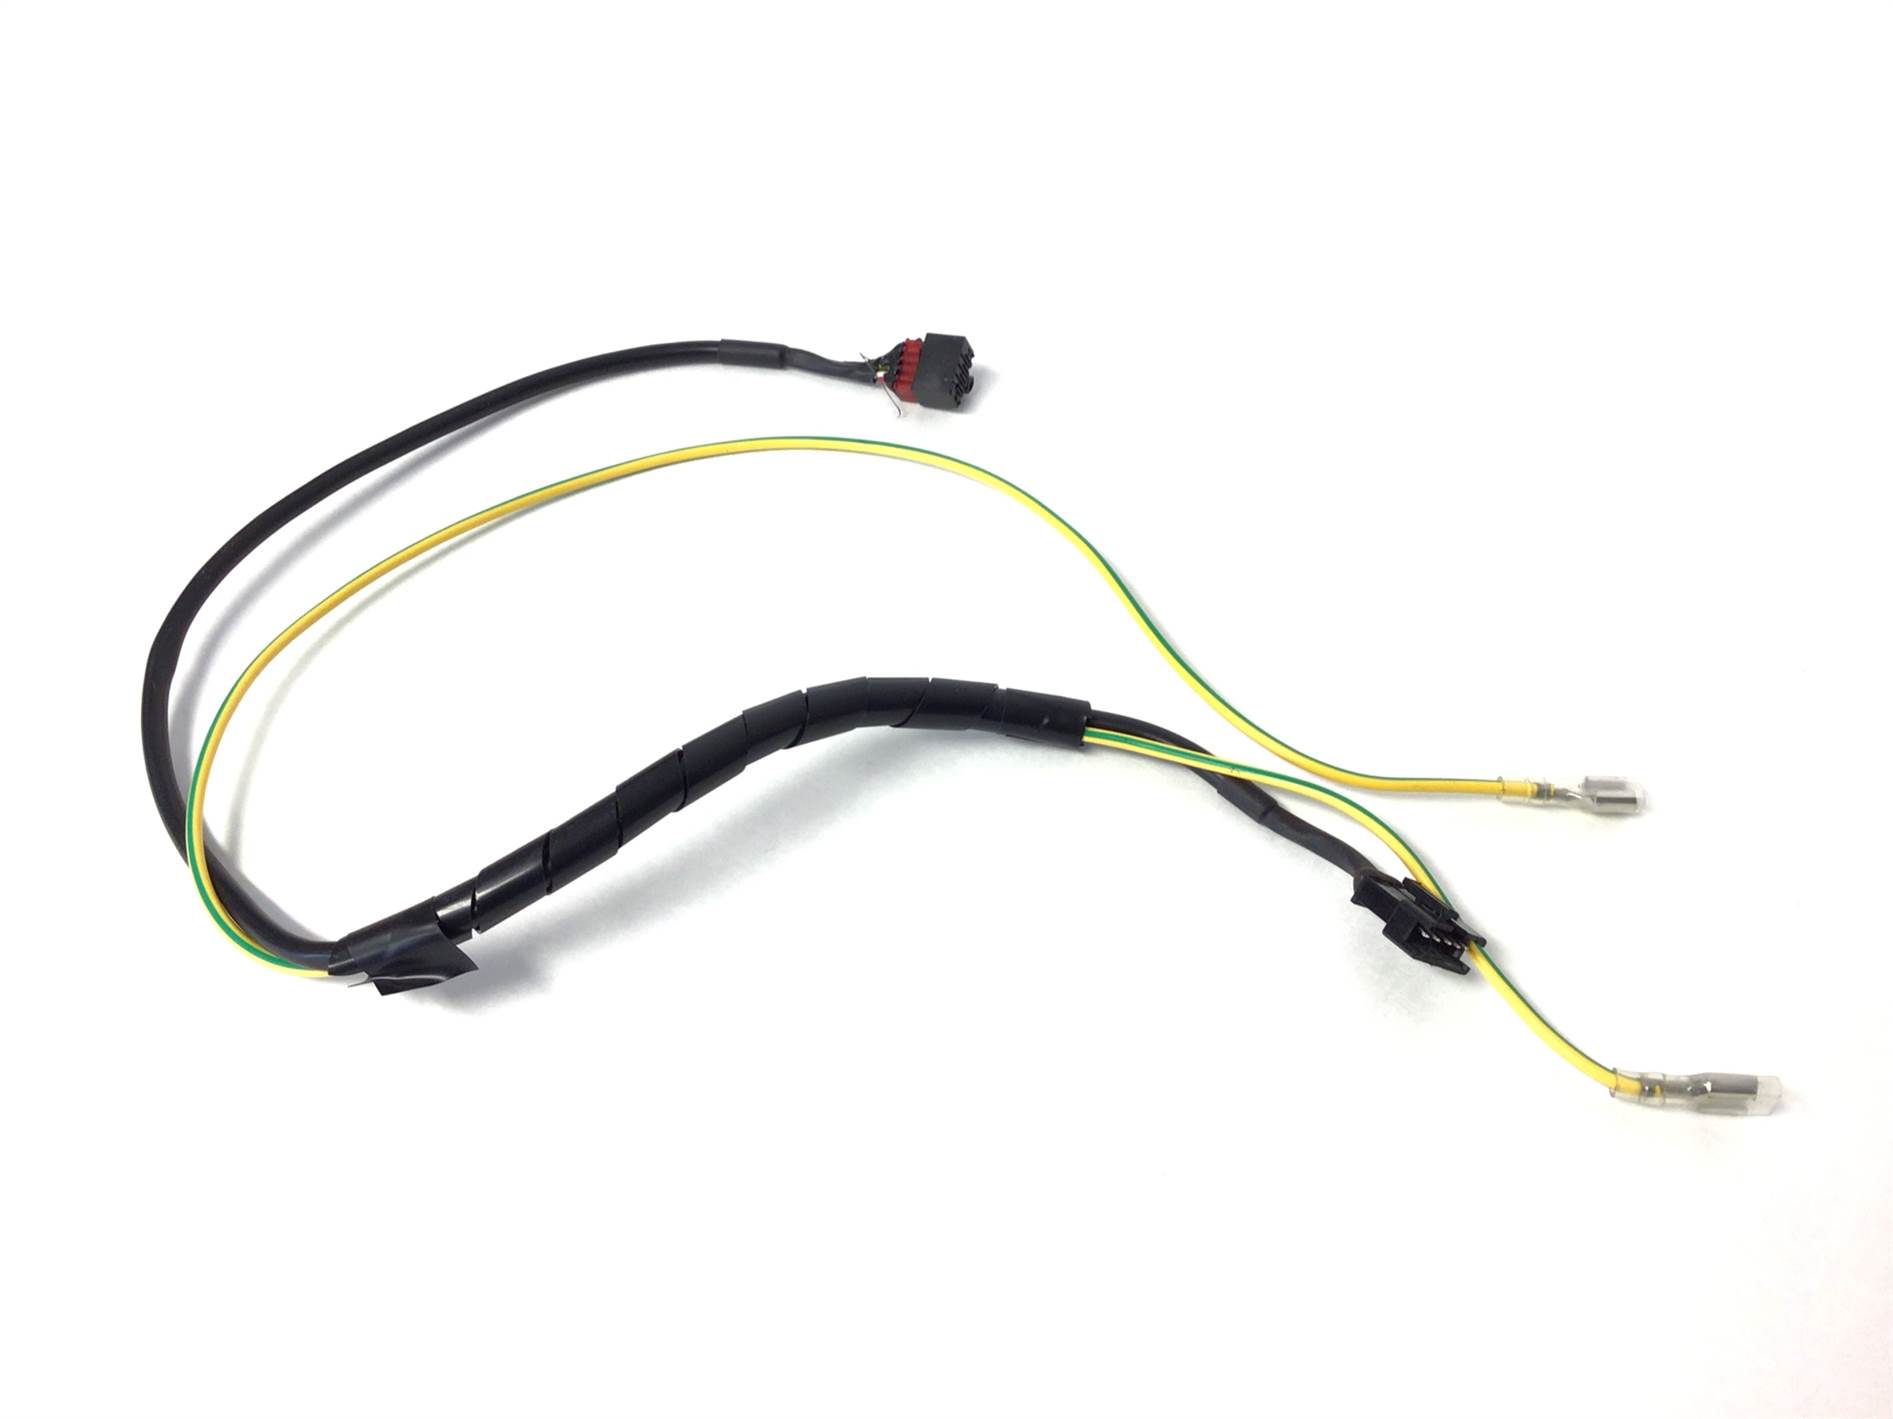 Lower Data Cable Wire Harness (Used)